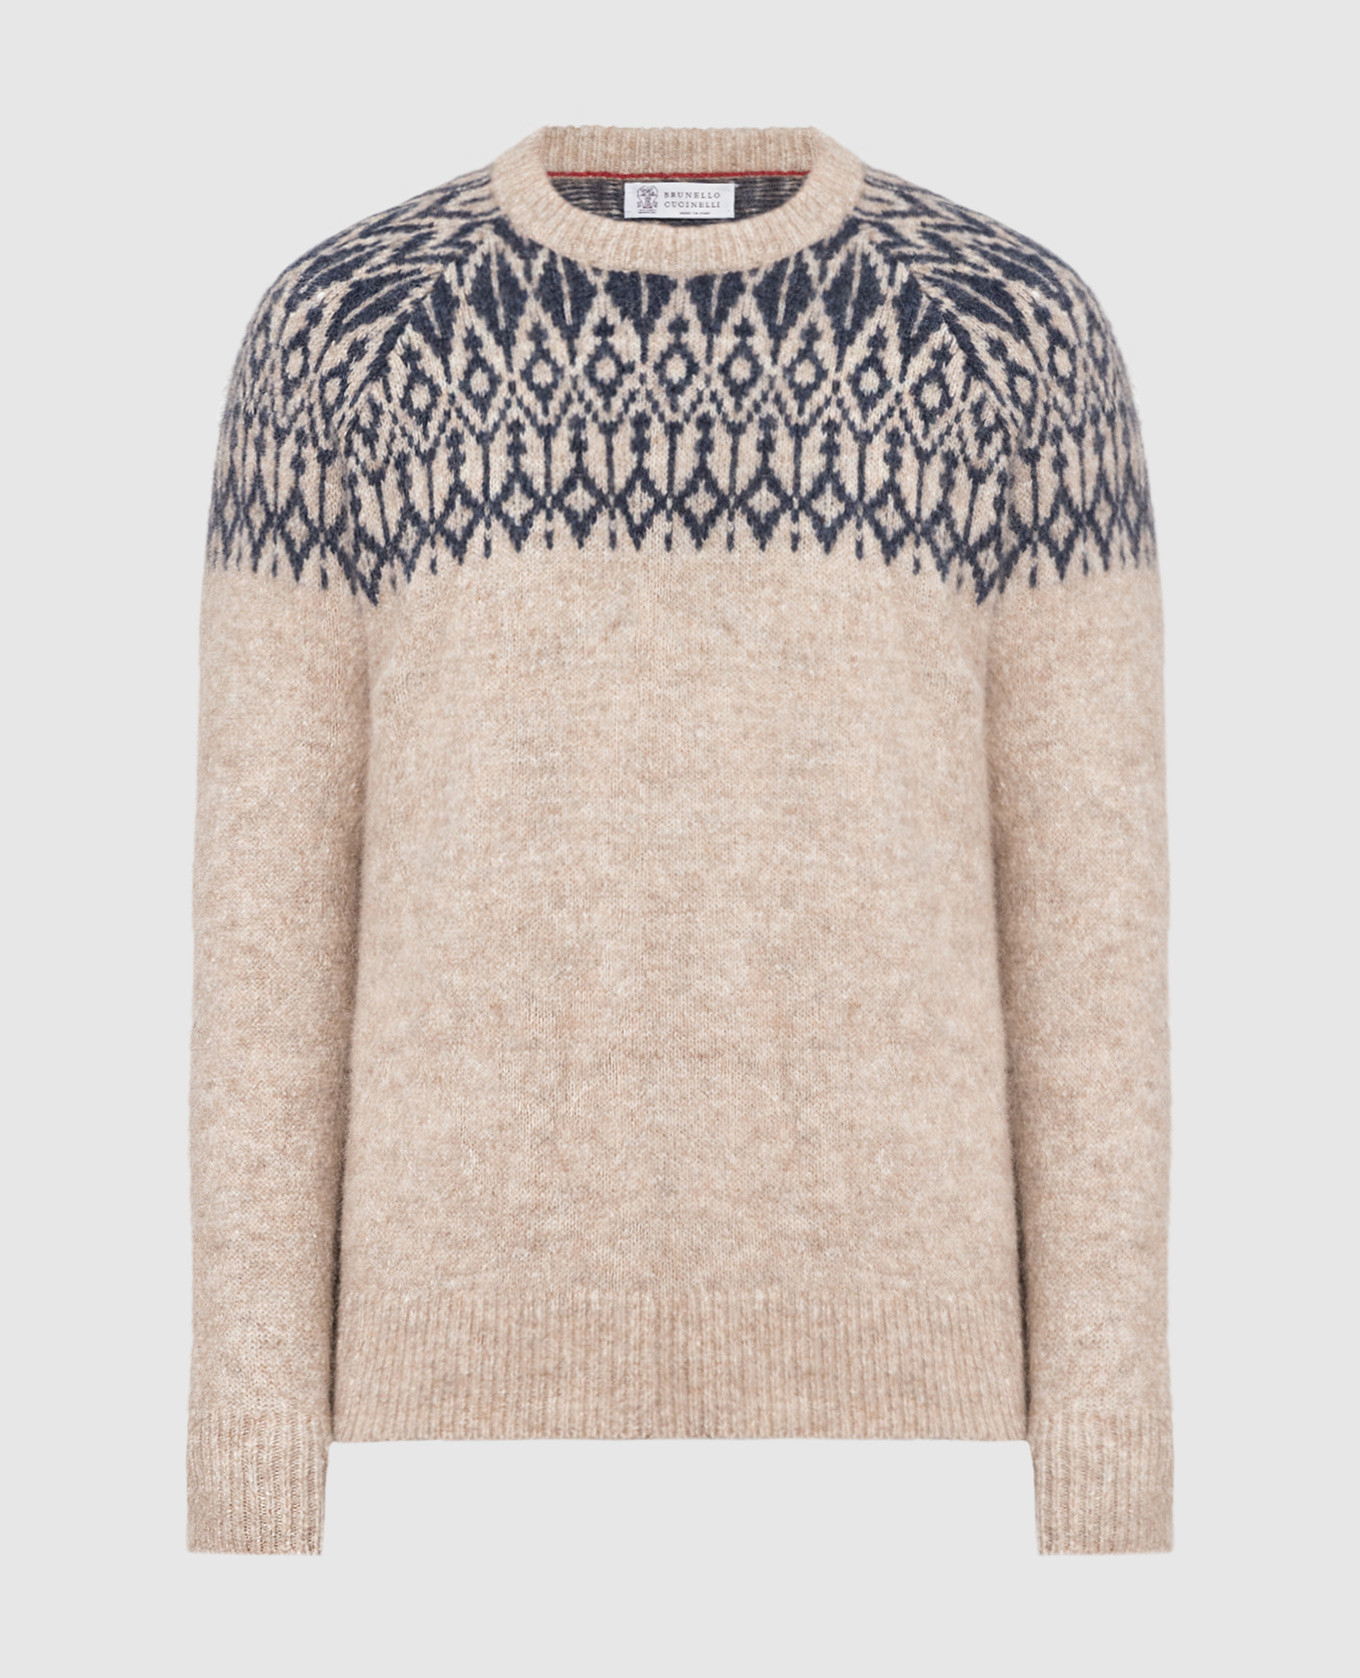 Beige sweater with a pattern